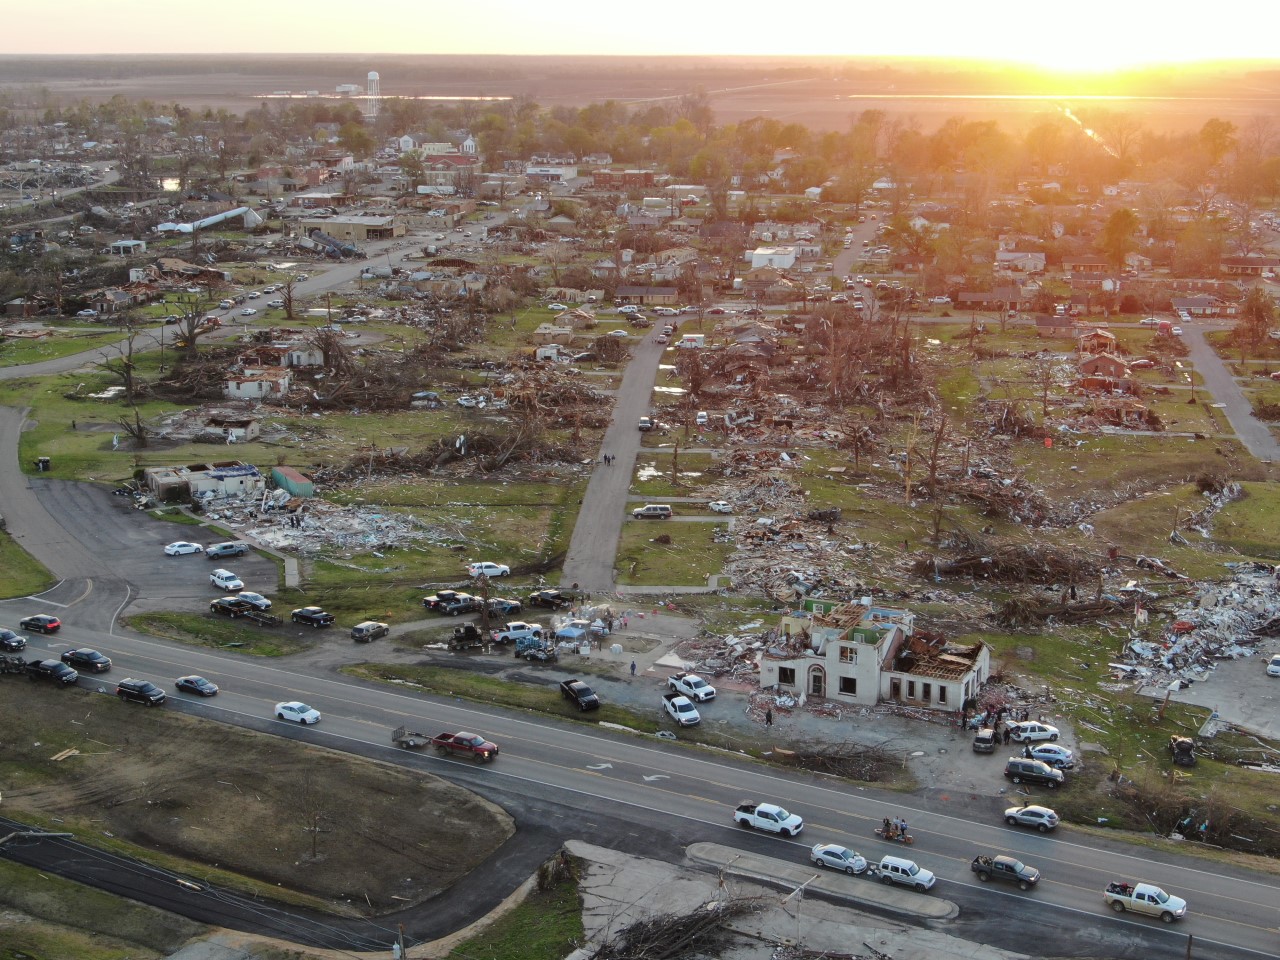 Drone footage allowed scouts to assess widespread damage across Rolling Fork.